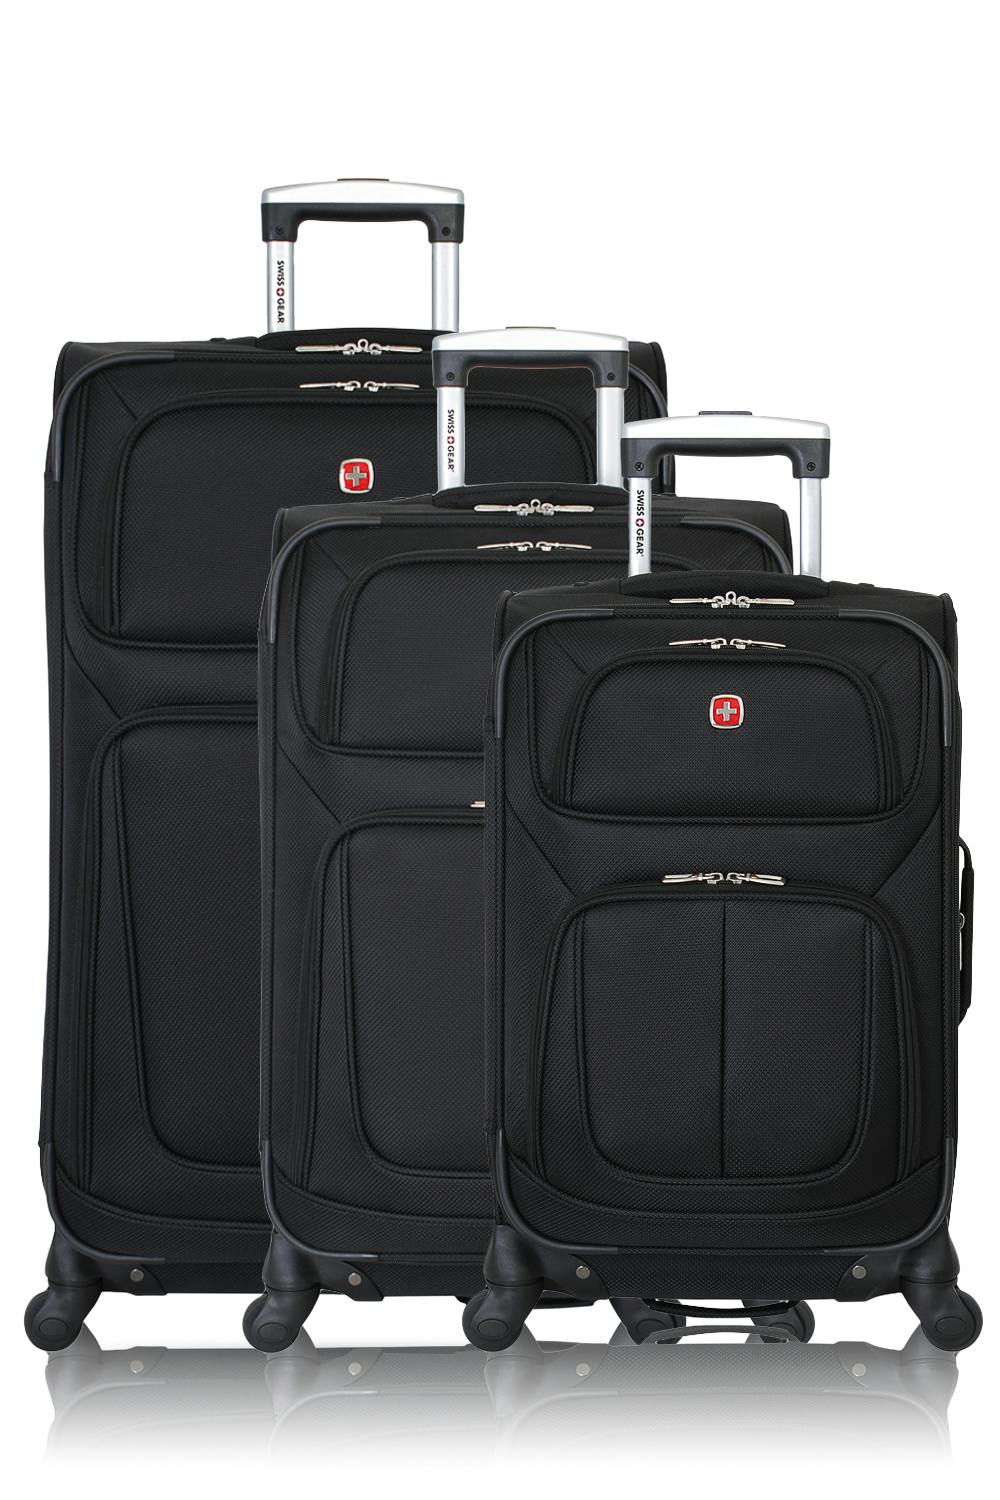 Lifestyle image of the Swissgear Sion 6283 Expandable 3pc Spinner Luggage Set